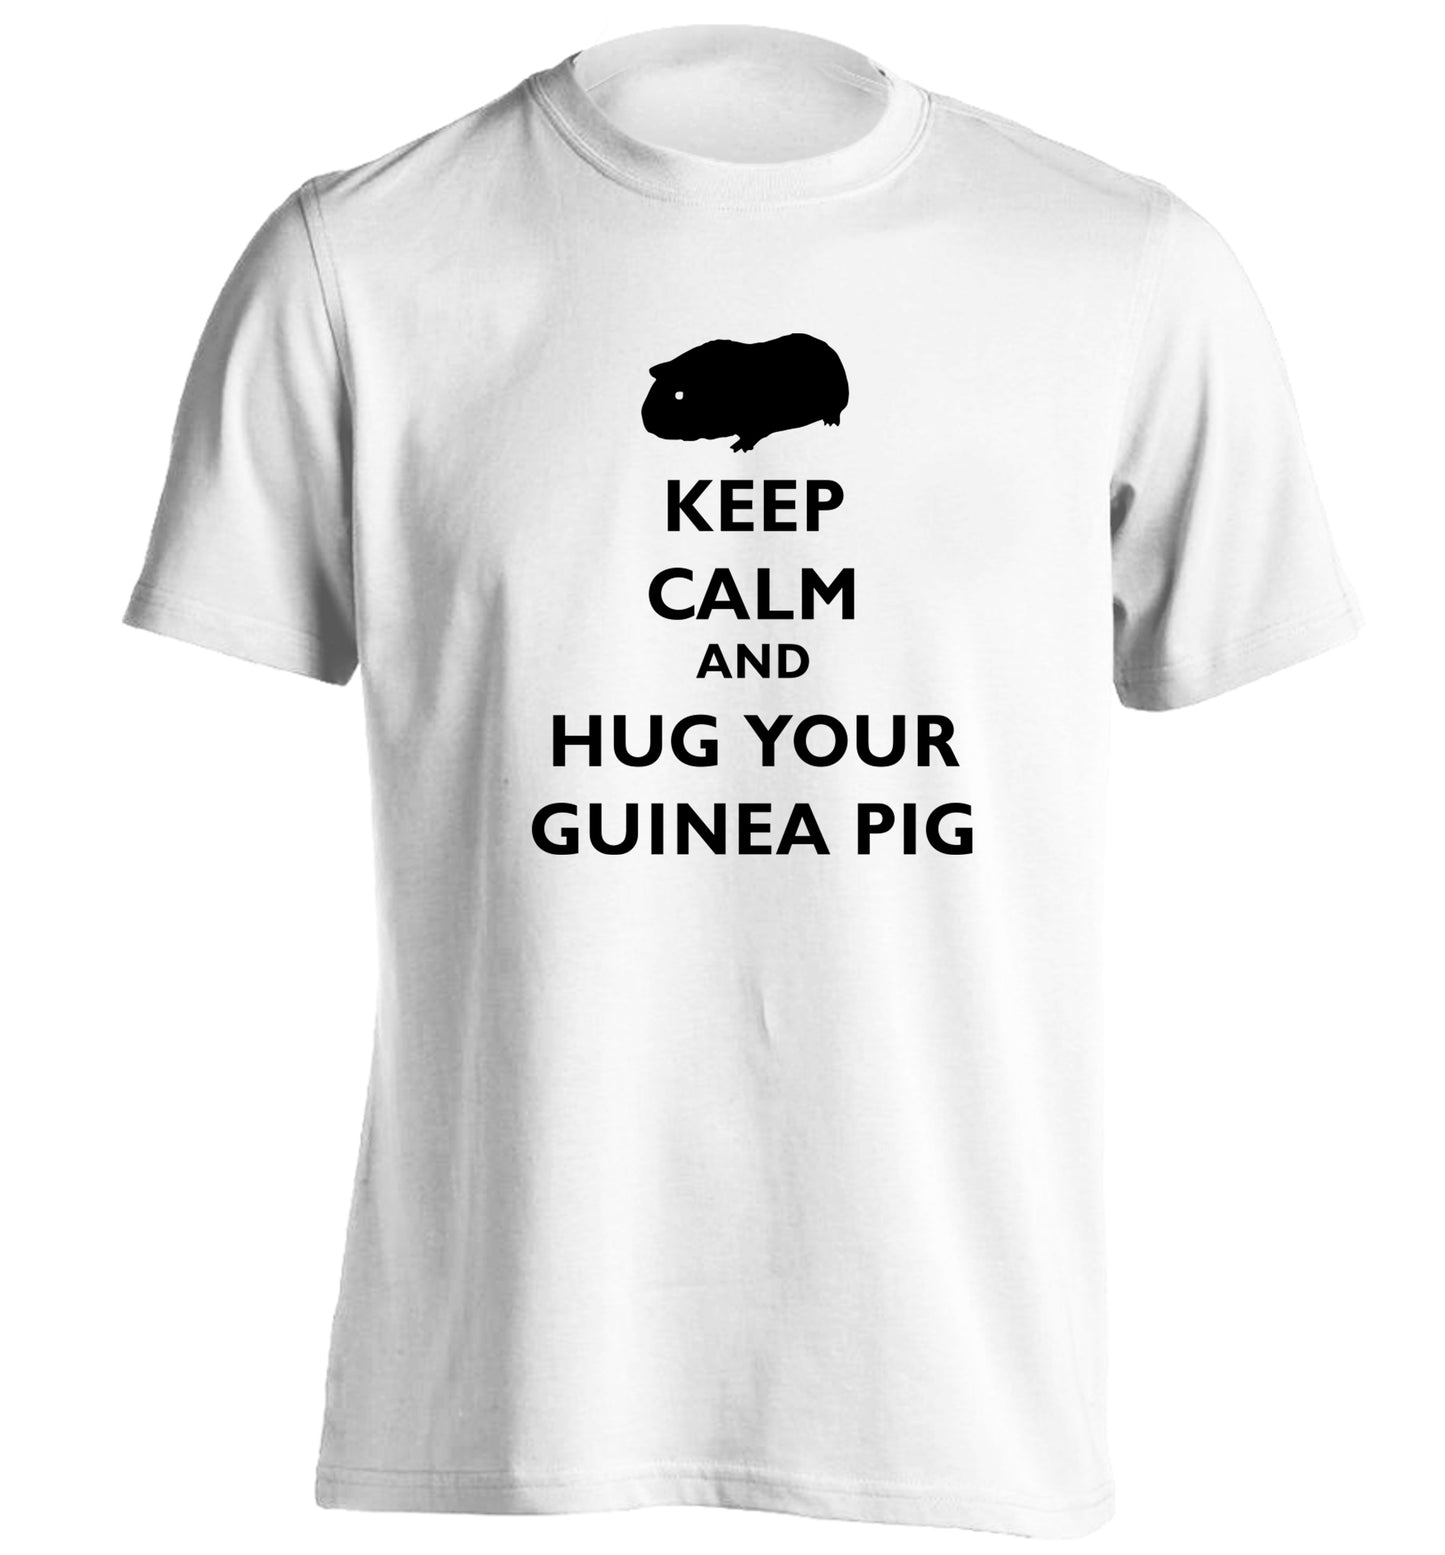 Keep calm and hug your guineapig adults unisex white Tshirt 2XL